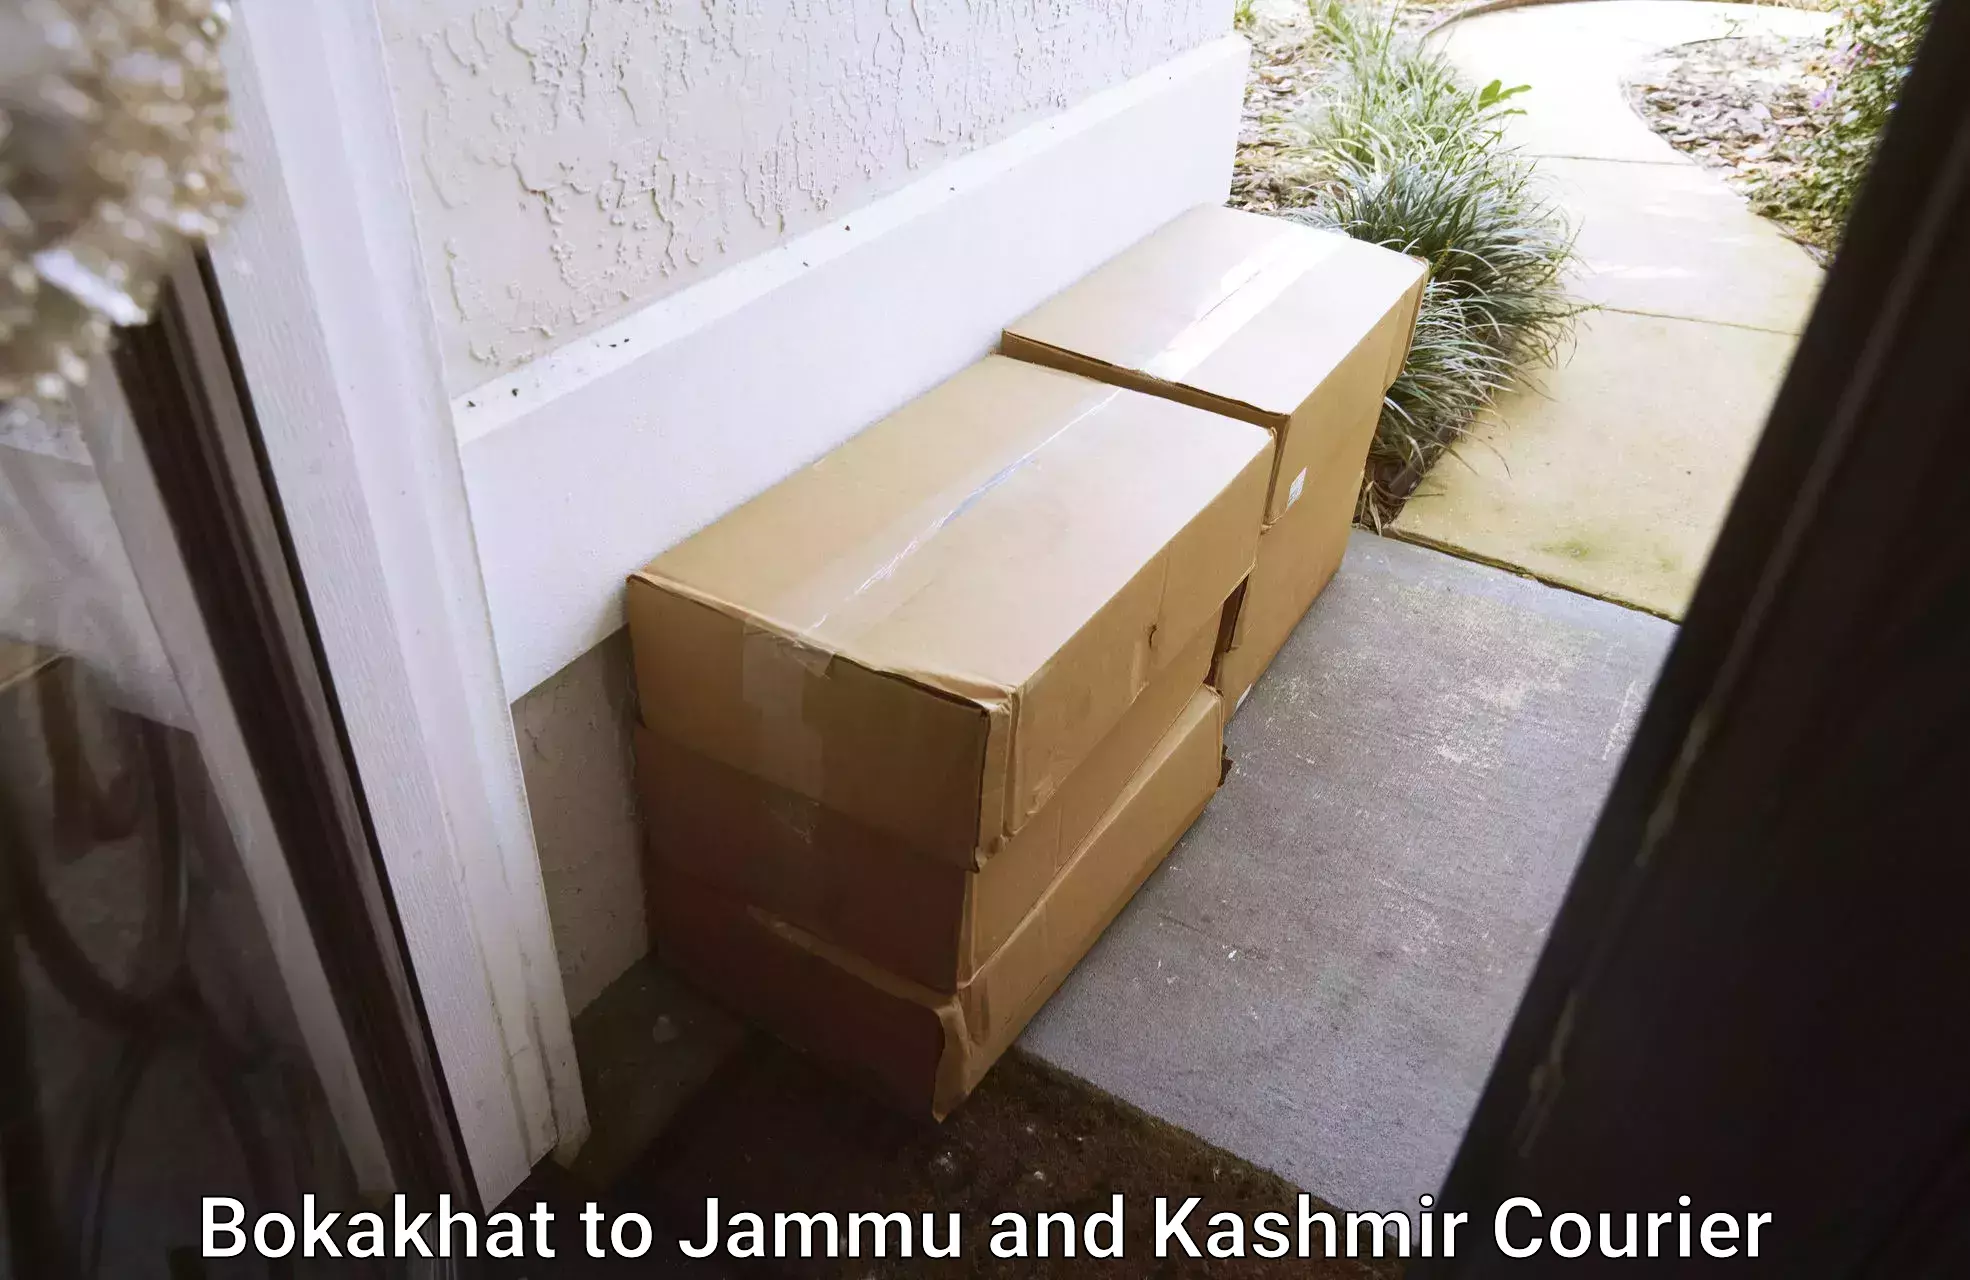 Seamless shipping experience Bokakhat to Jammu and Kashmir